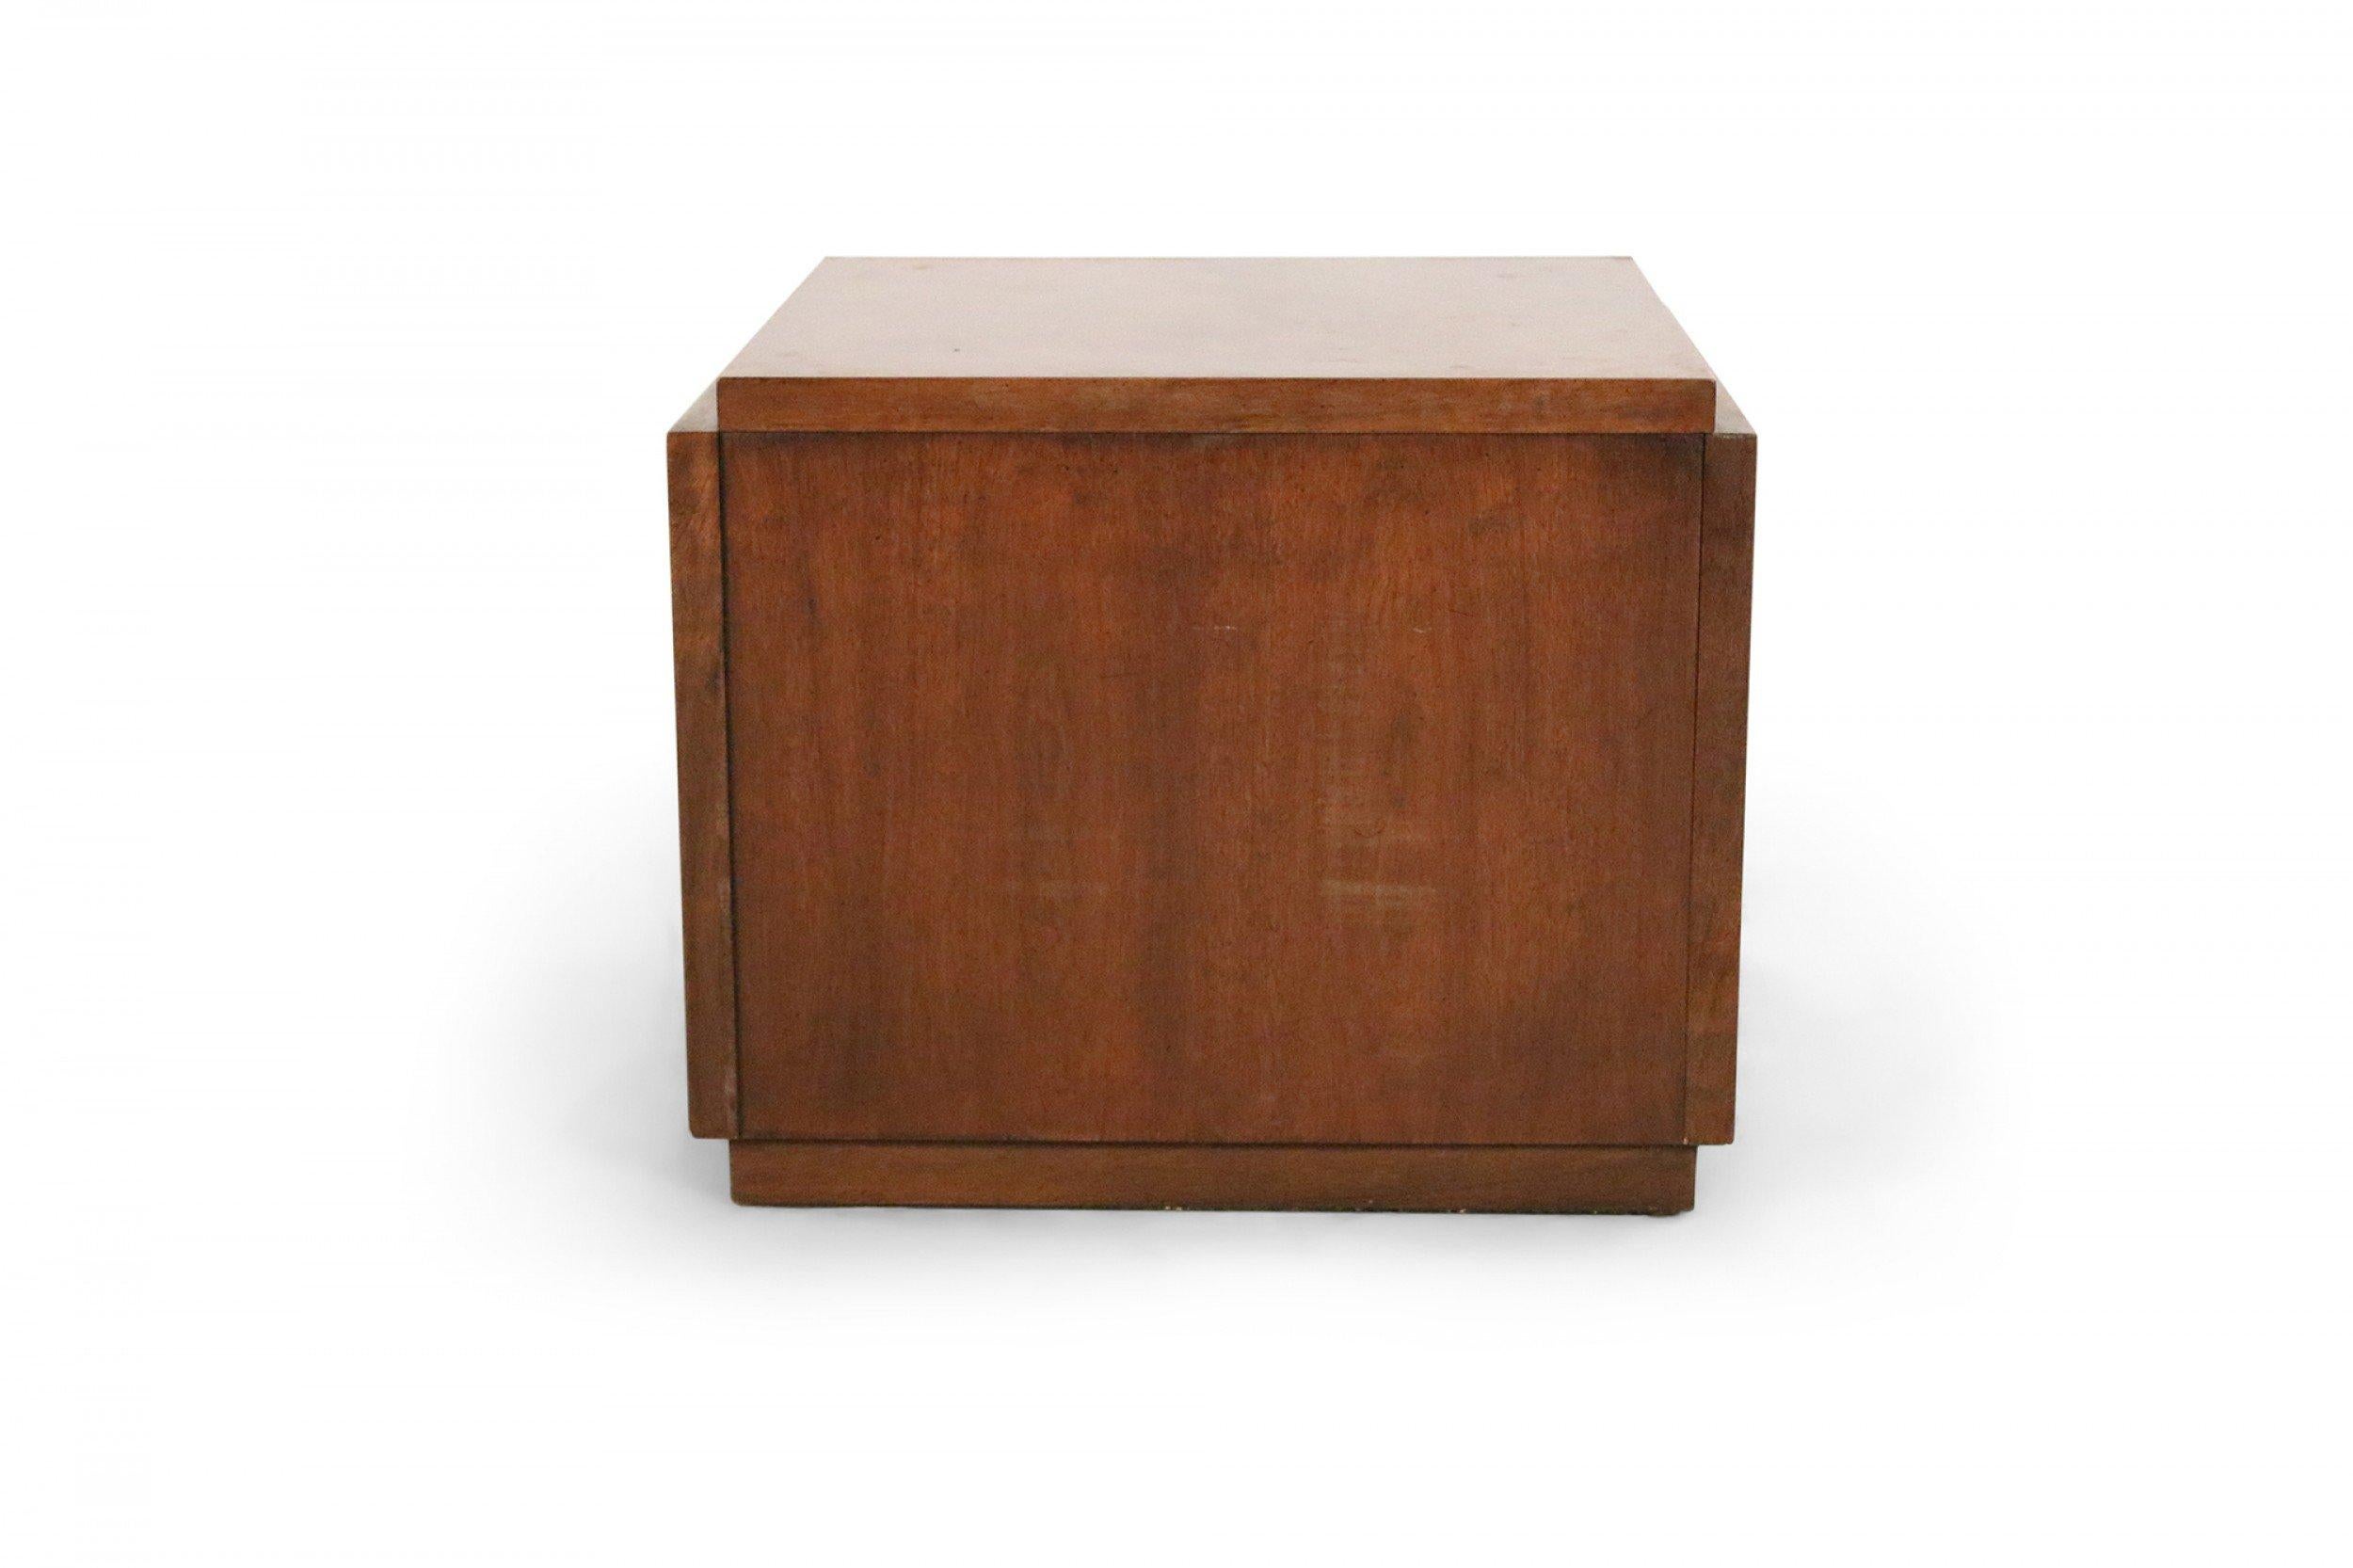 Mid-century Brutalist square walnut side table cabinet with geometric front panel design (LANE).
      